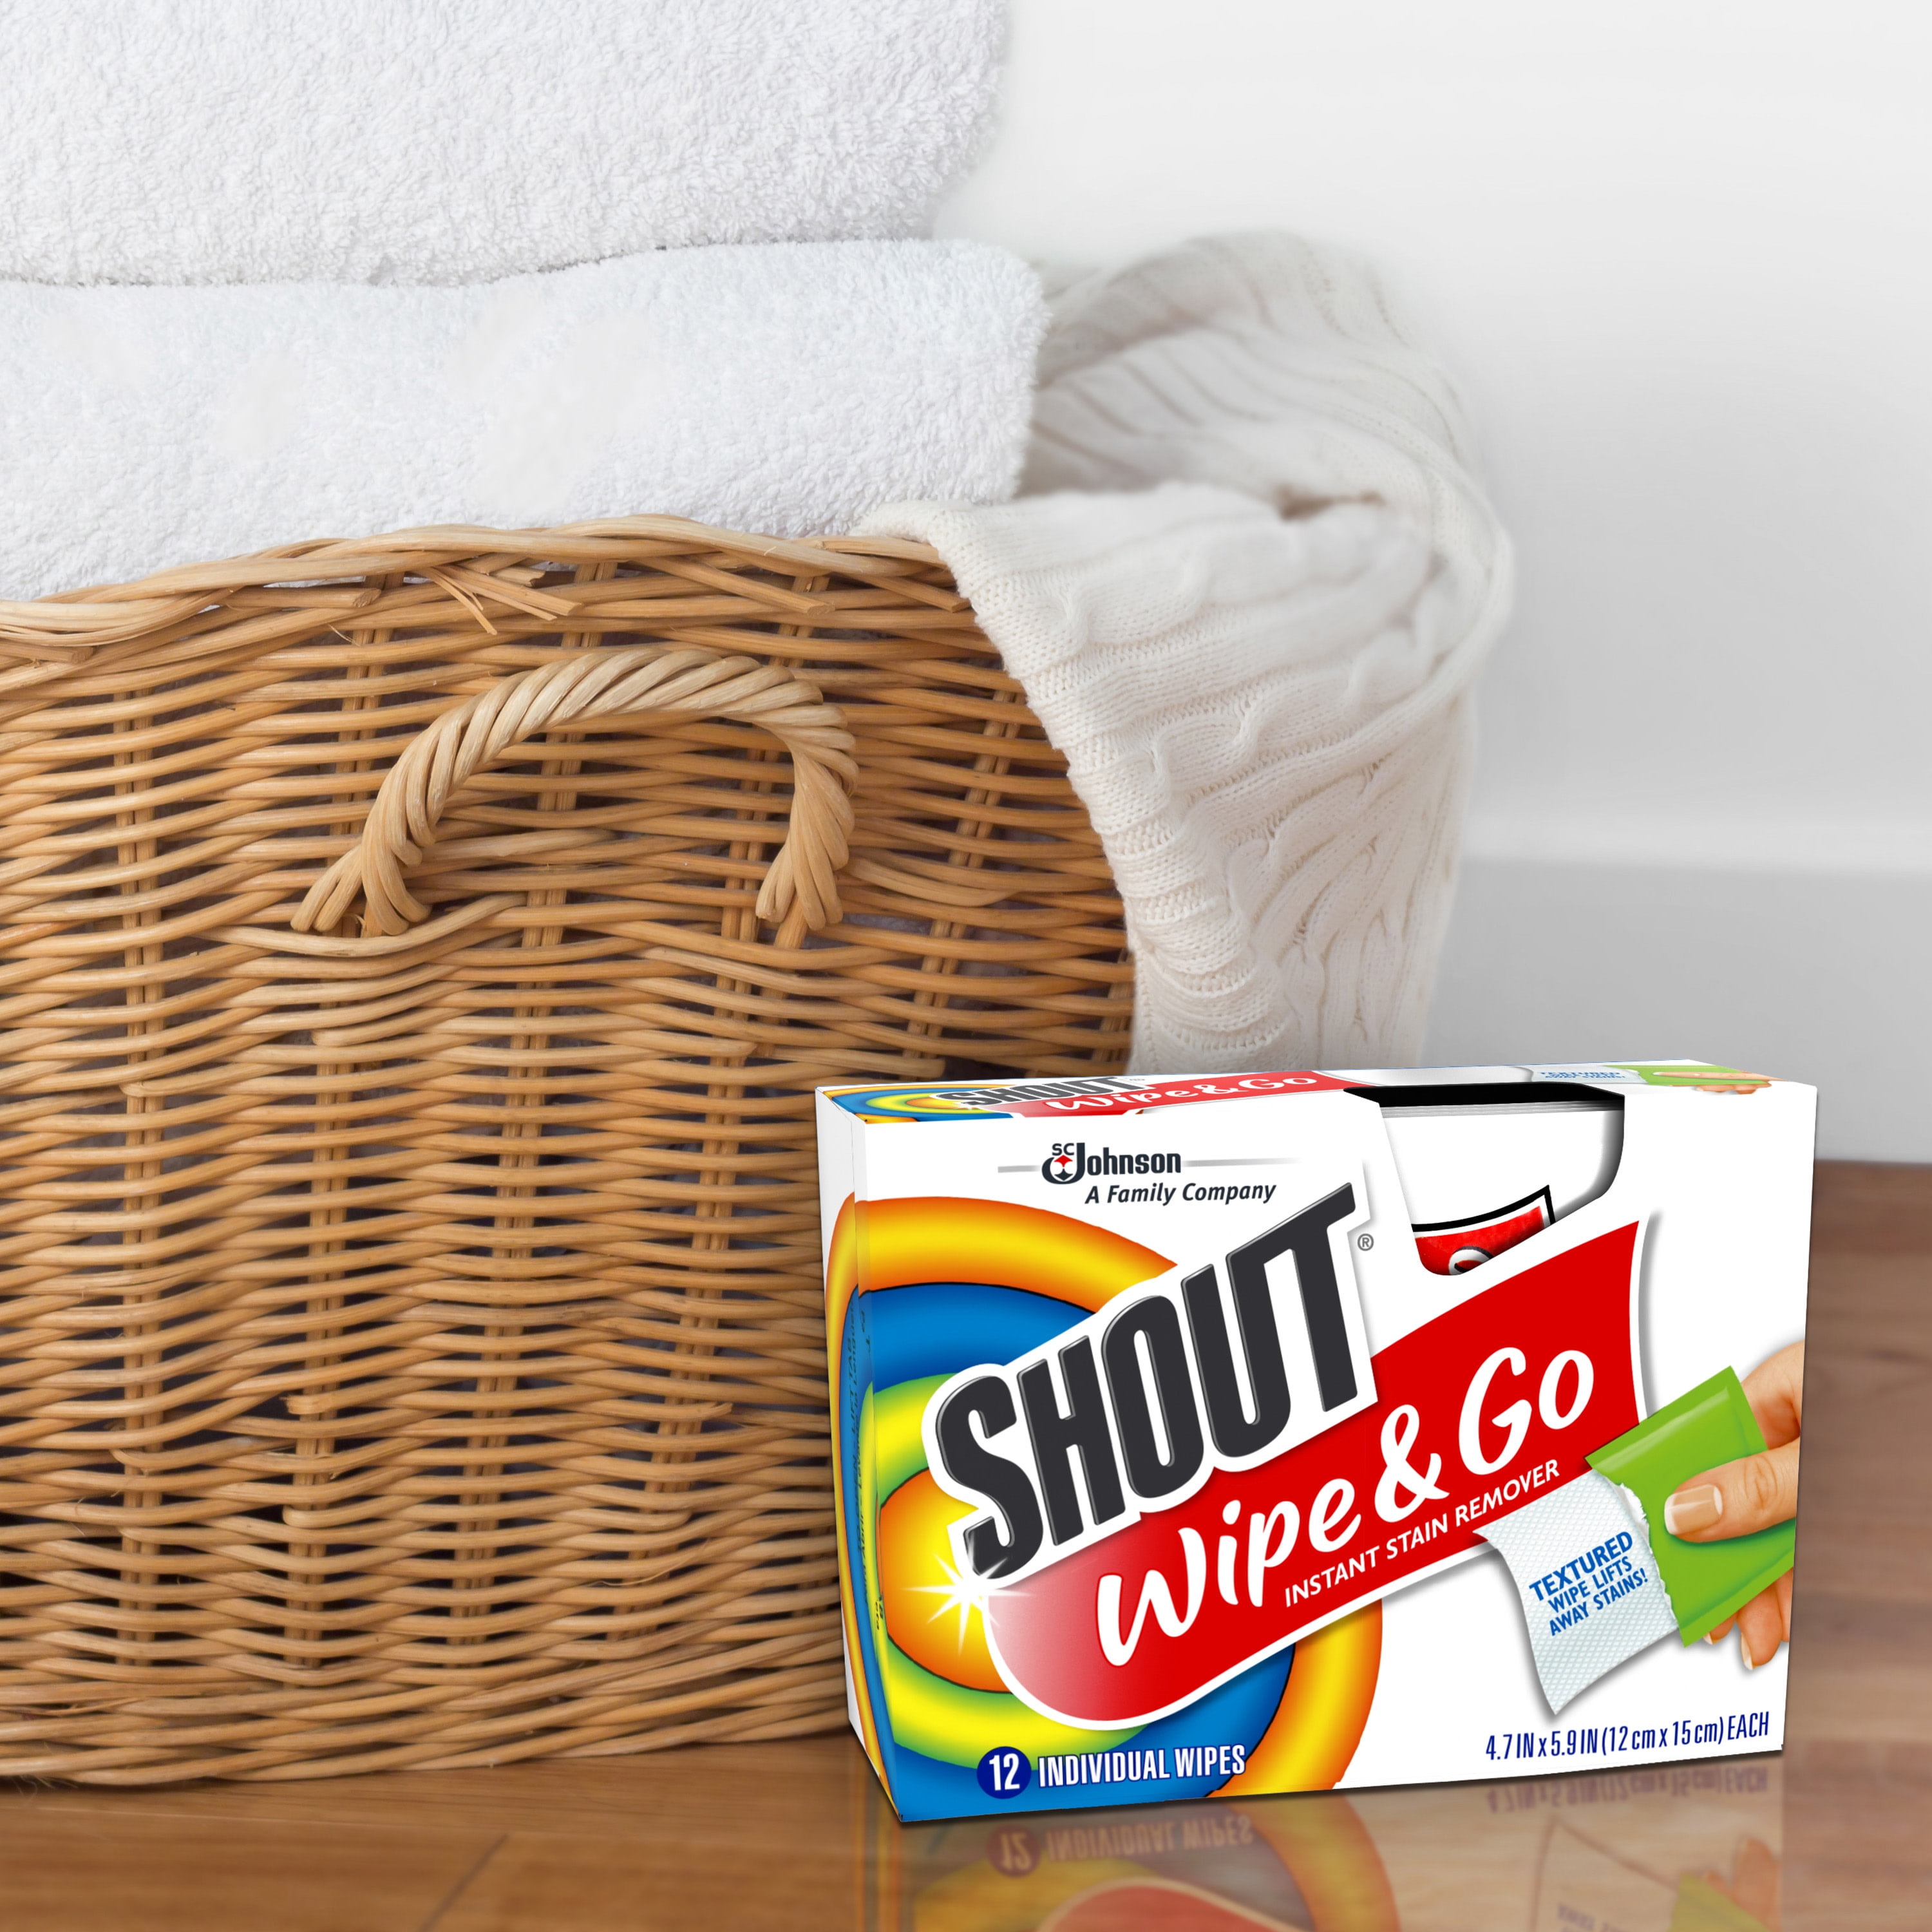 Shout Wipes - Portable Stain Treater Towelettes - Pack of (24) Wipes